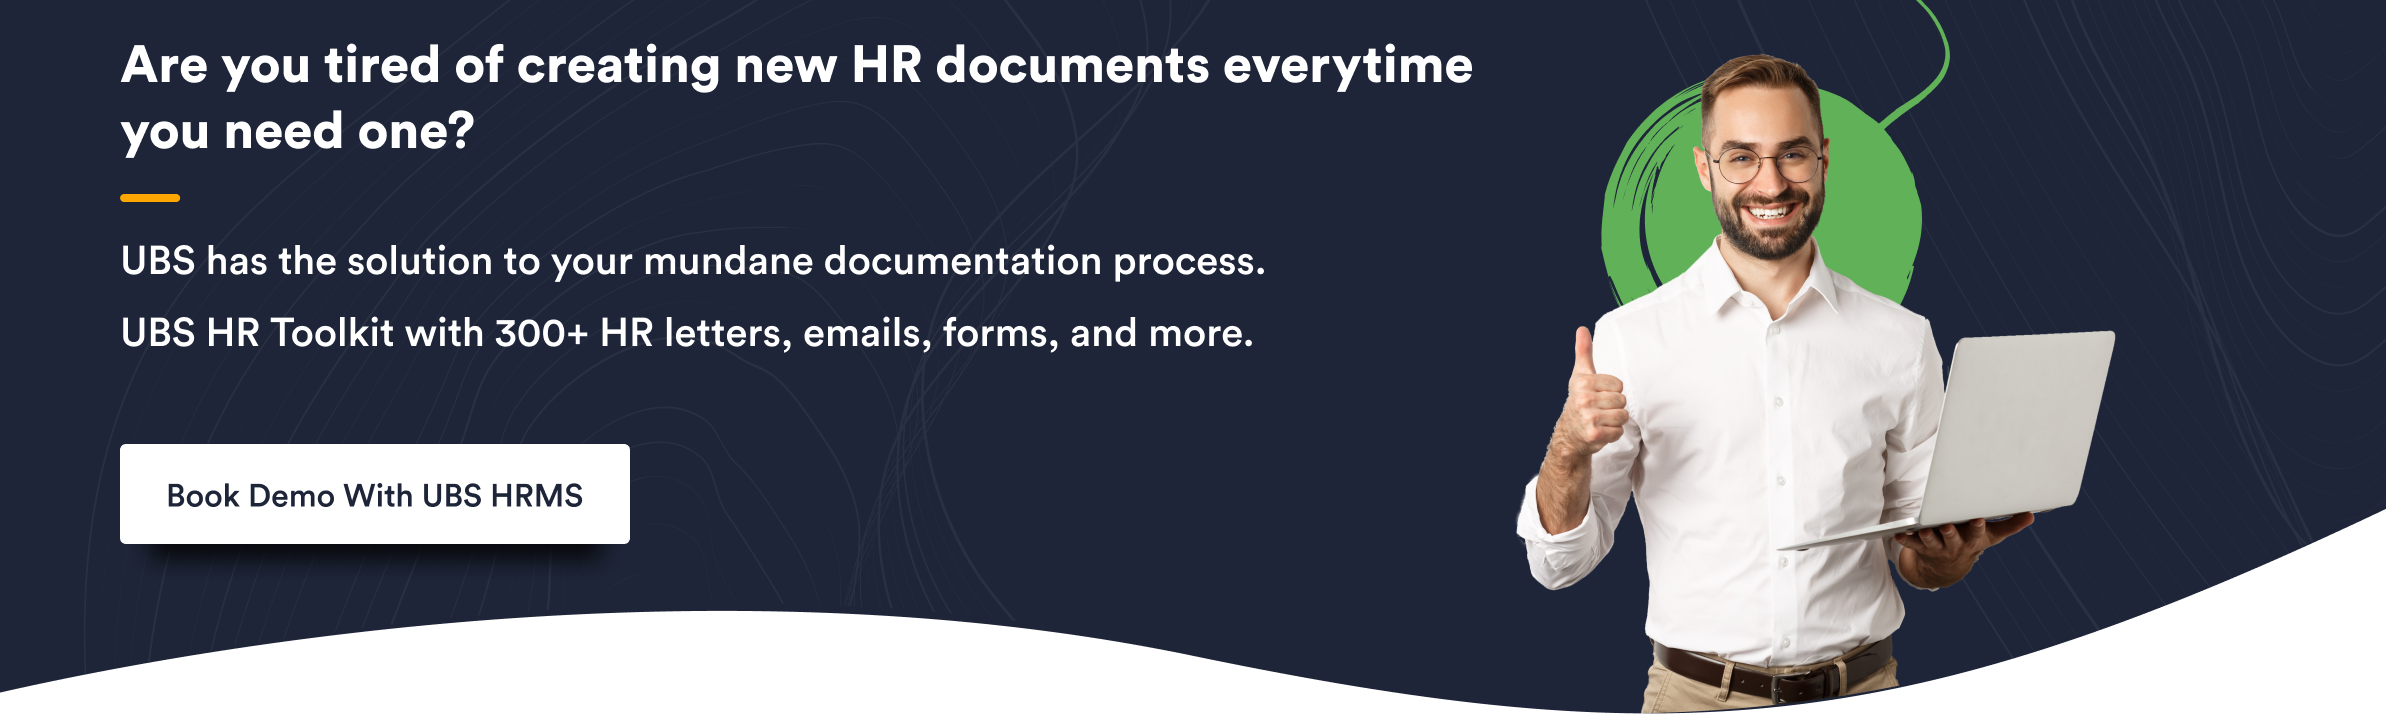 Are you tired of creating new HR documents everytime you need one